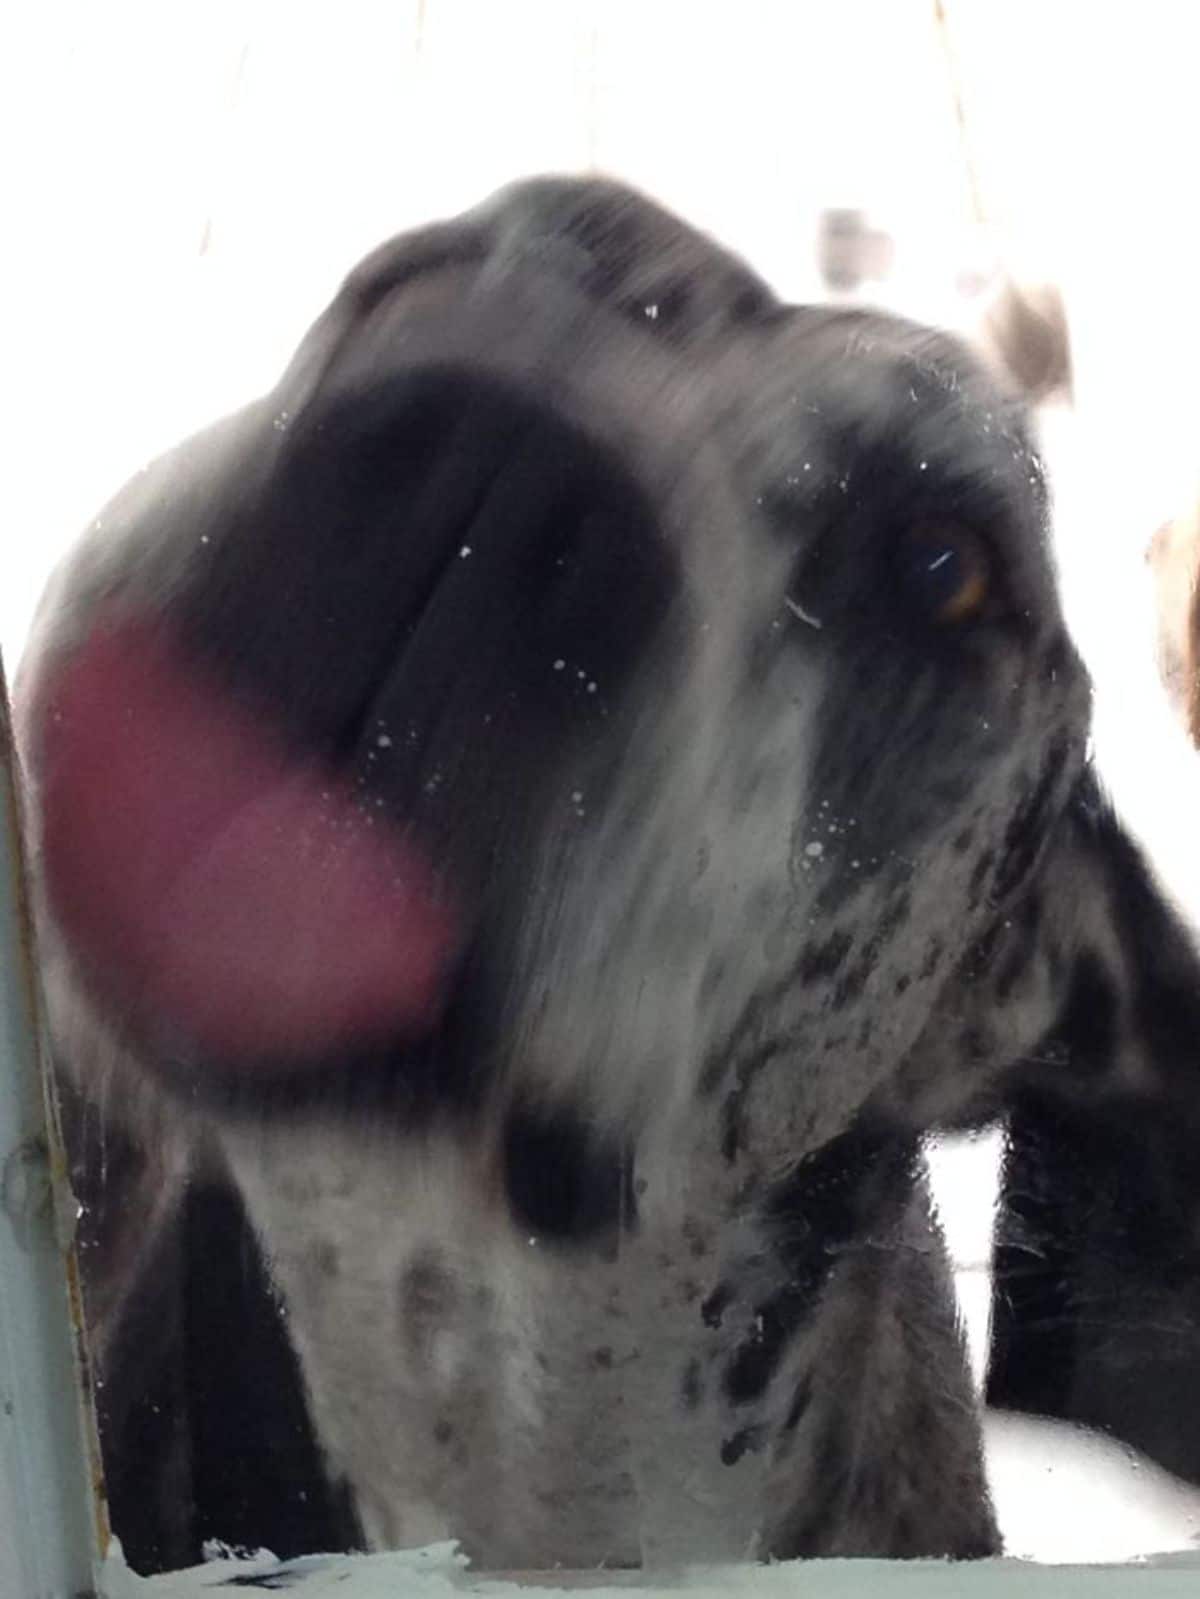 blurry image of black and white dog licking a glass